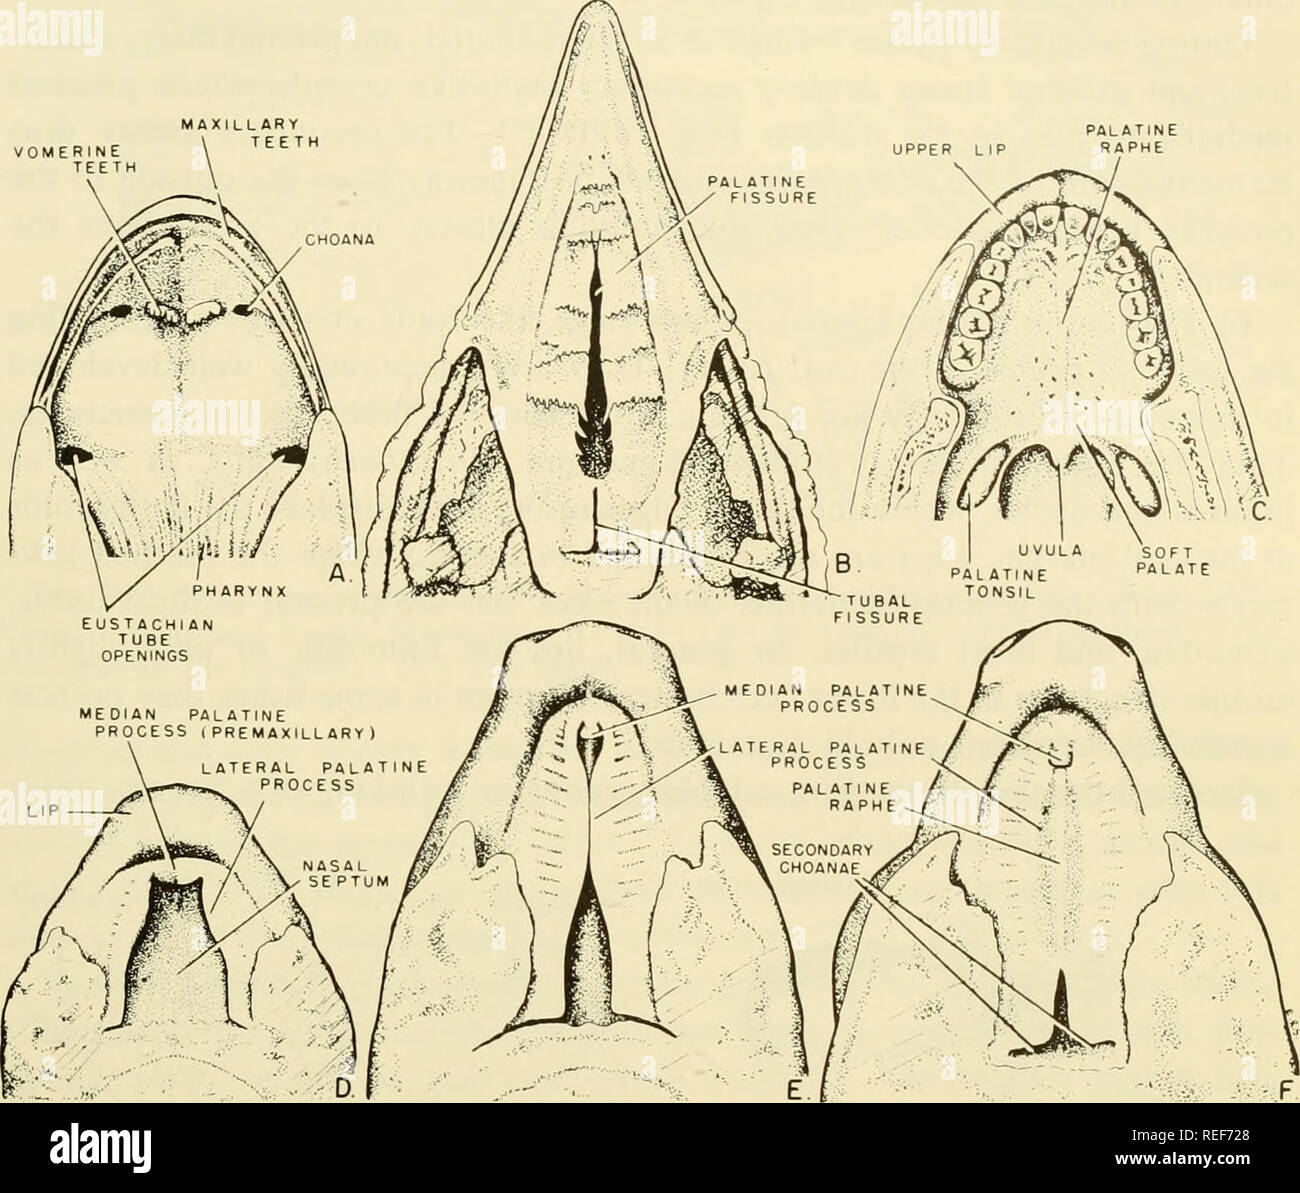 . Comparative embryology of the vertebrates; with 2057 drawings and photos. grouped as 380 illus. Vertebrates -- Embryology; Comparative embryology. DEVELOPMENT OF THE DIGESTIVE TUBE 615. Fig. 289. Palatal conditions in frog, chick, and mammal. (A) Frog, adult. (B) Chick, 16-day embryo. (C) Human adult. (Redrawn and modified from Morris, 1942, Human Anatomy, Blakiston, Phila.) Only the anterior or hard palate is supported by bone, the soft palate being a fleshy continuation of the palate caudally toward the pharyngeal area. (D-F) Stages in development of the palate in the pig. (D) 20.5 mm. (E) Stock Photo